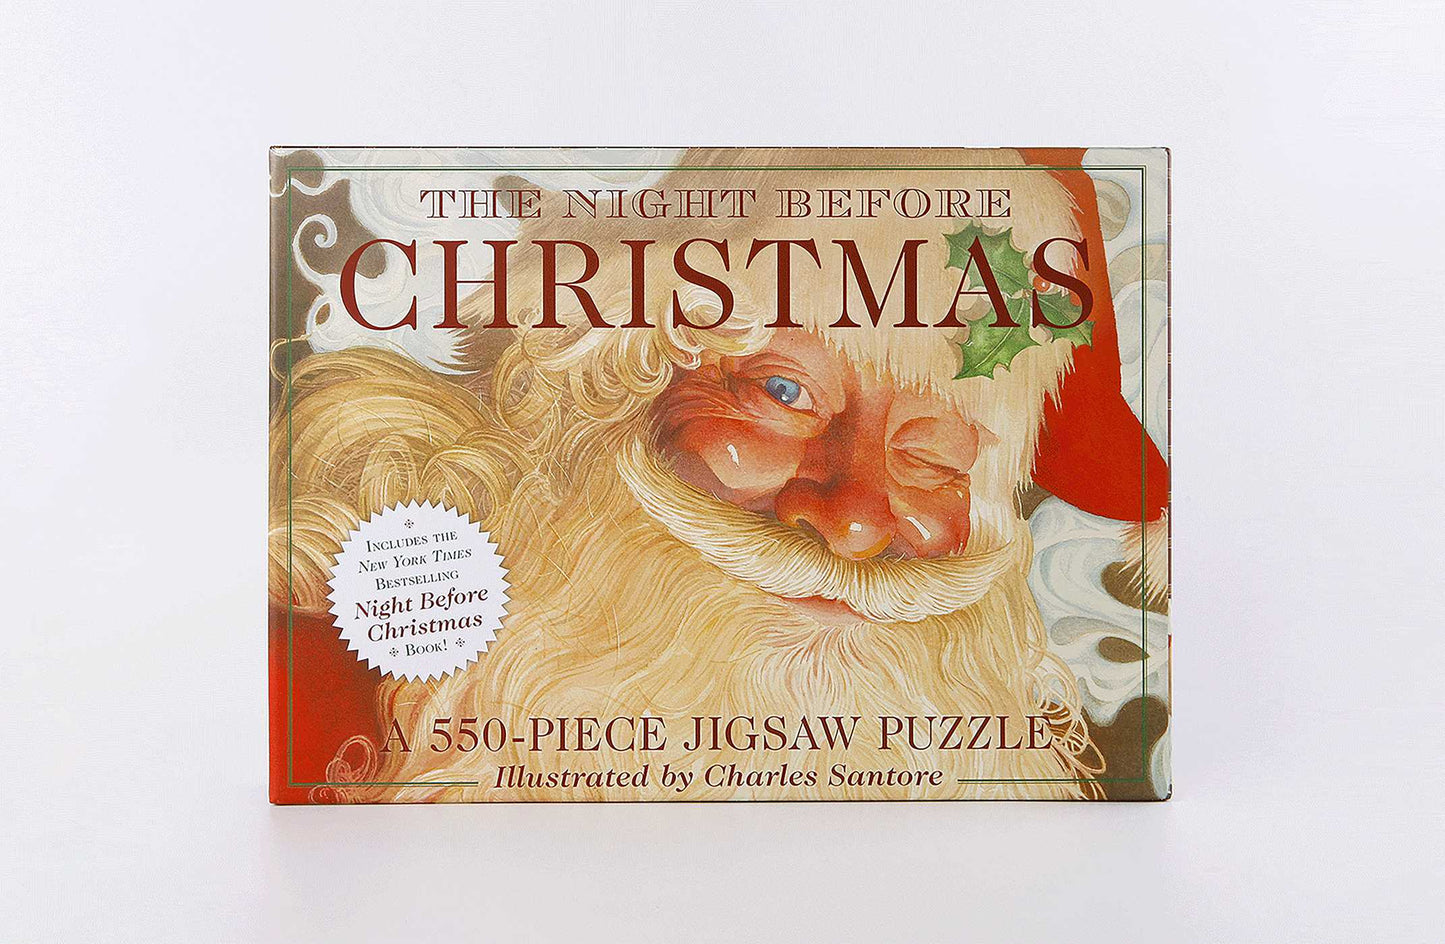 The Night Before Christmas: 550-Piece Jigsaw Puzzle & Book: A 550-Piece Family Jigsaw Puzzle Featuring The Night Before Christmas!